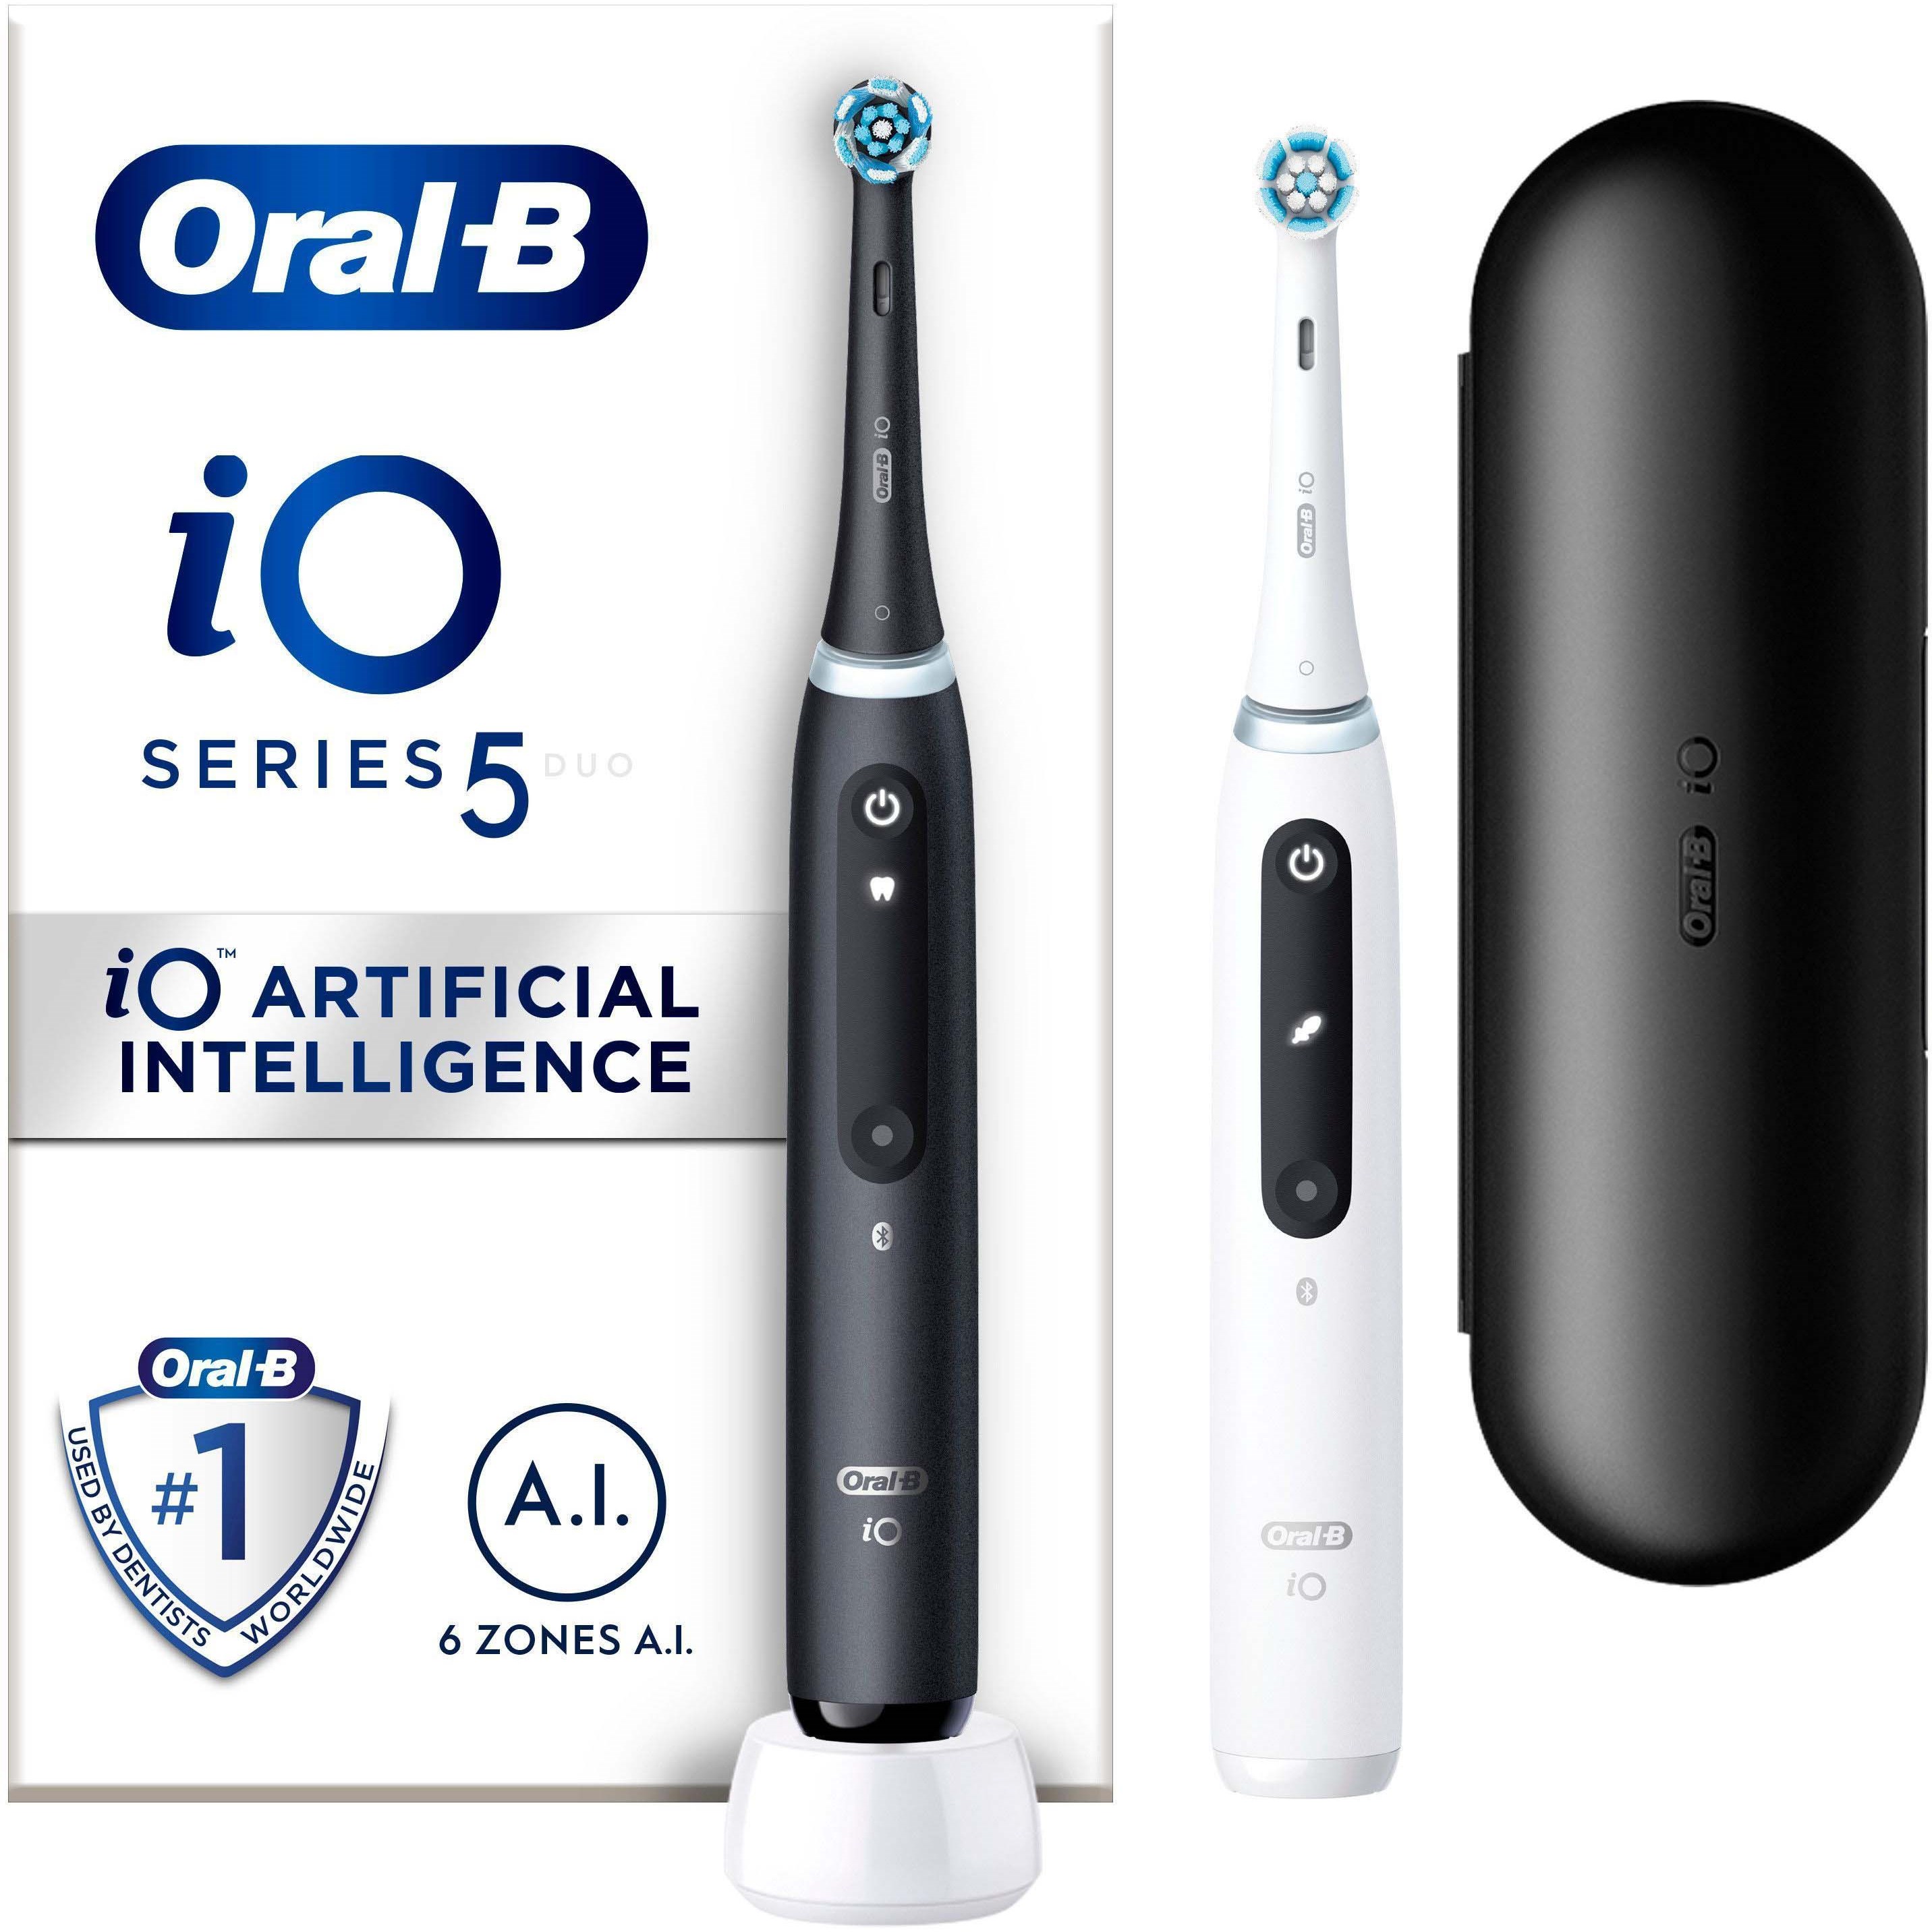 Oral B iO 5 black and white electric toothbrushes Designed by Braun